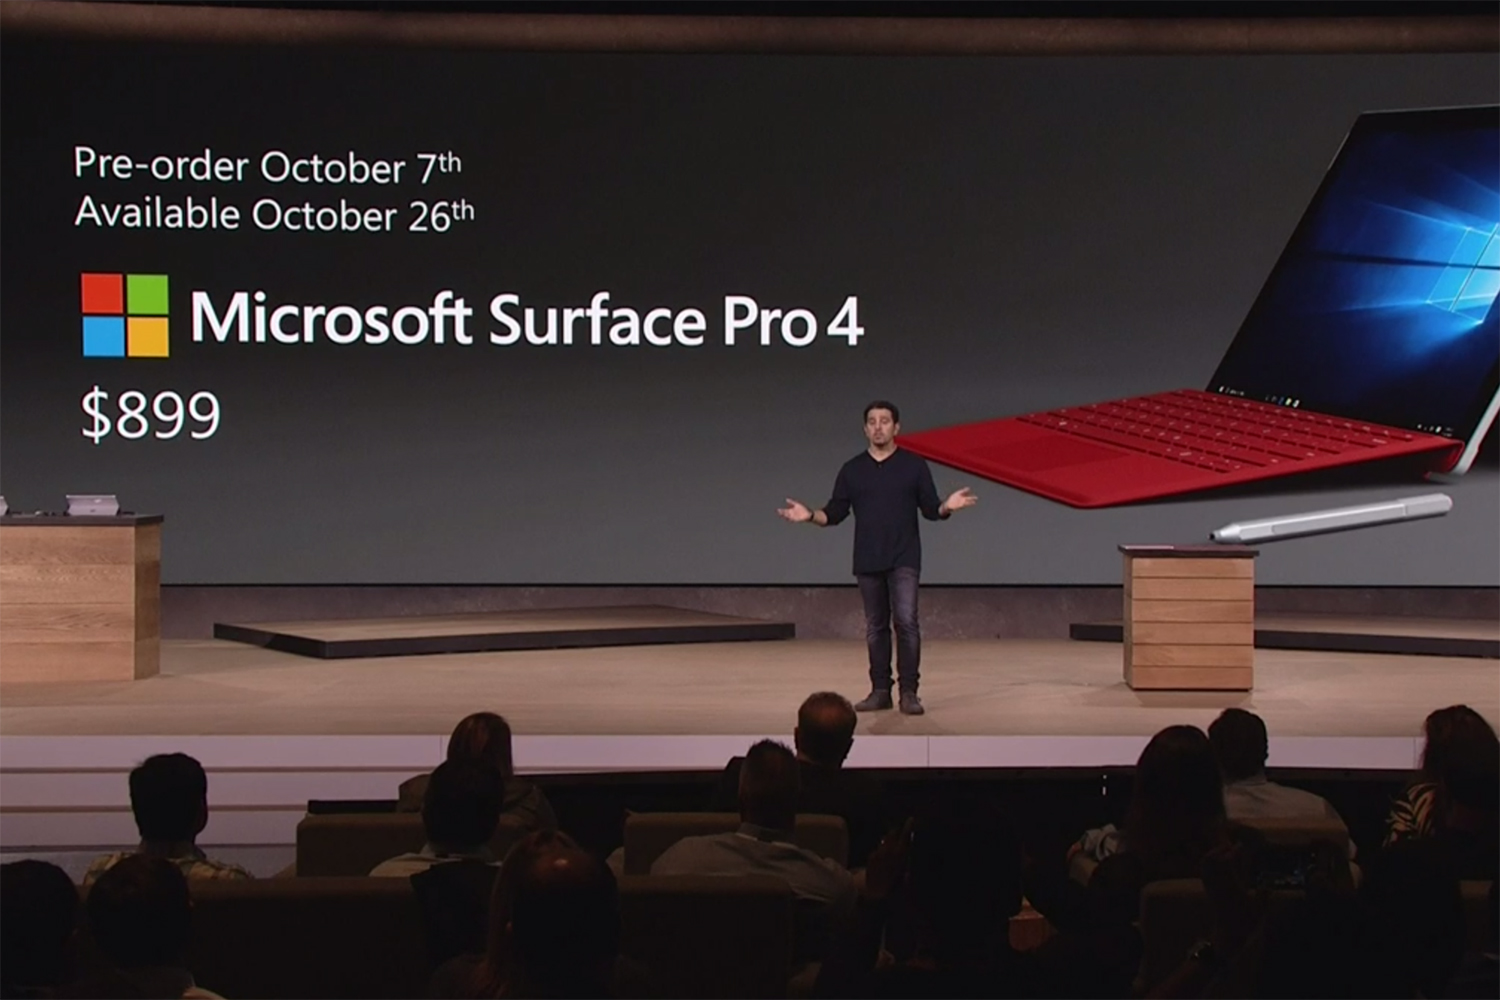 microsofts surface pro 4 rides the wave 3 started surfacepro4 6